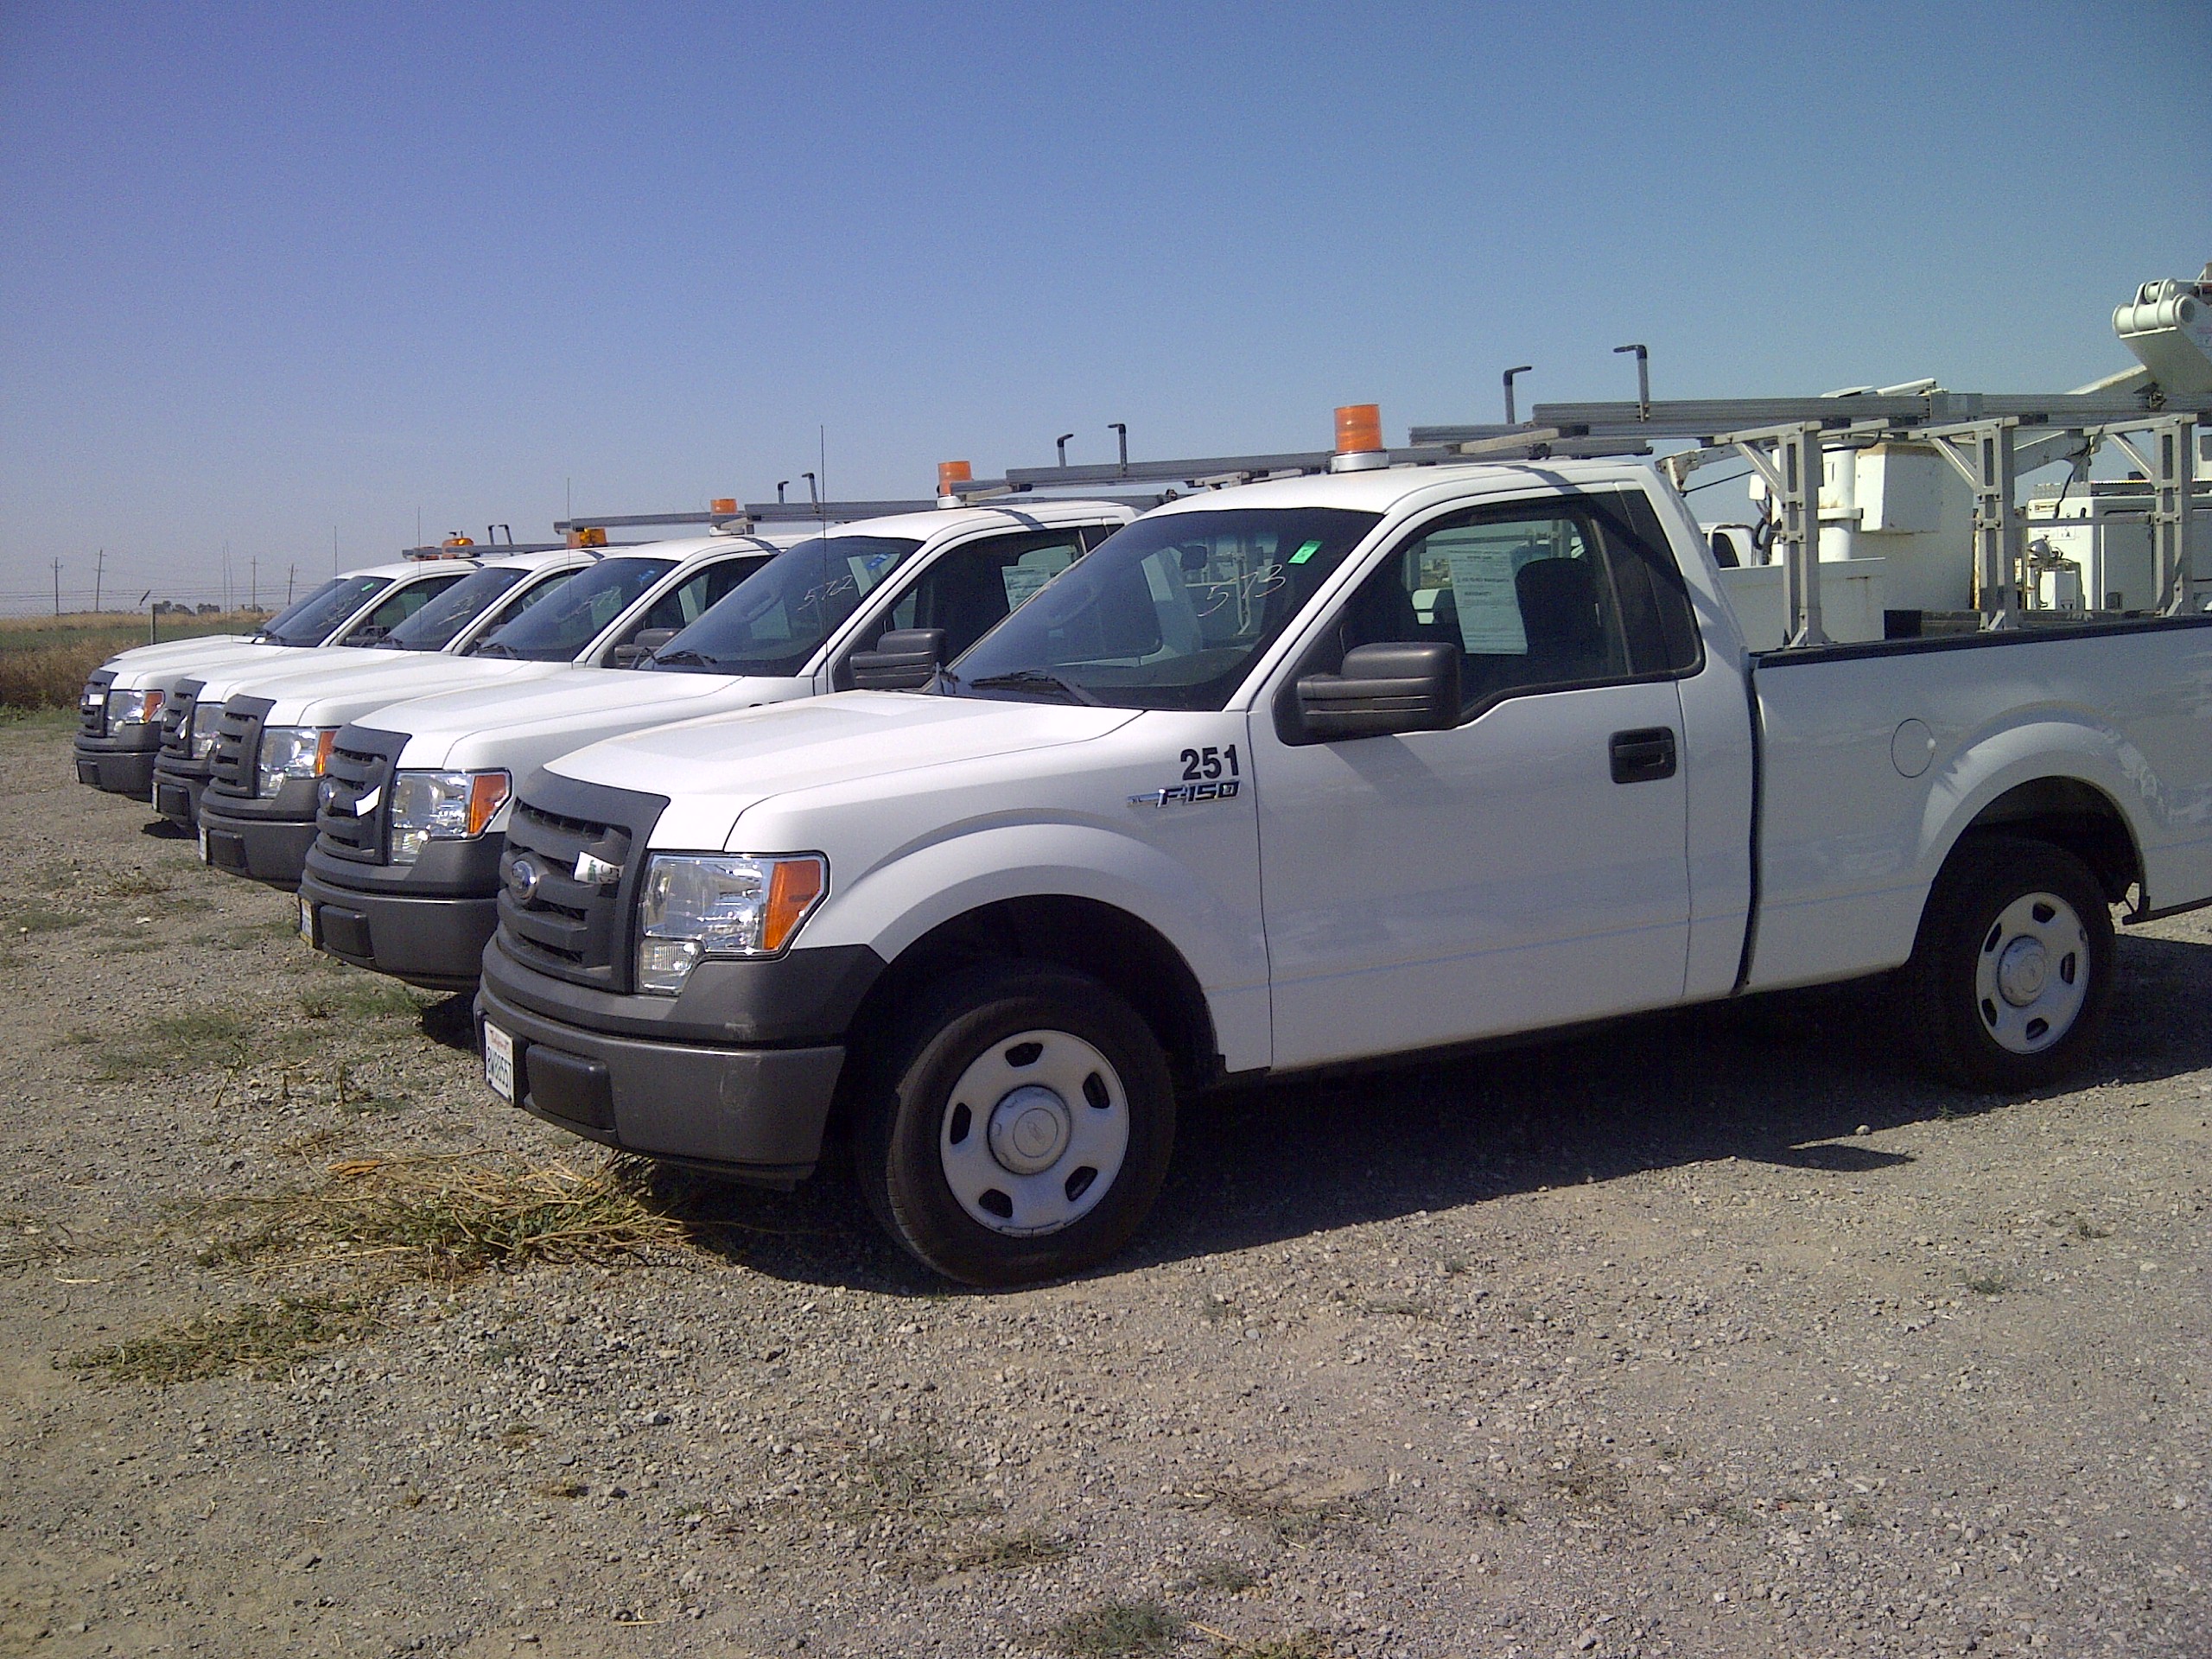 Large Public Auction in Salt Lake City, UT for Used Cars, Trucks, Vans, SUV\u002639;s and More